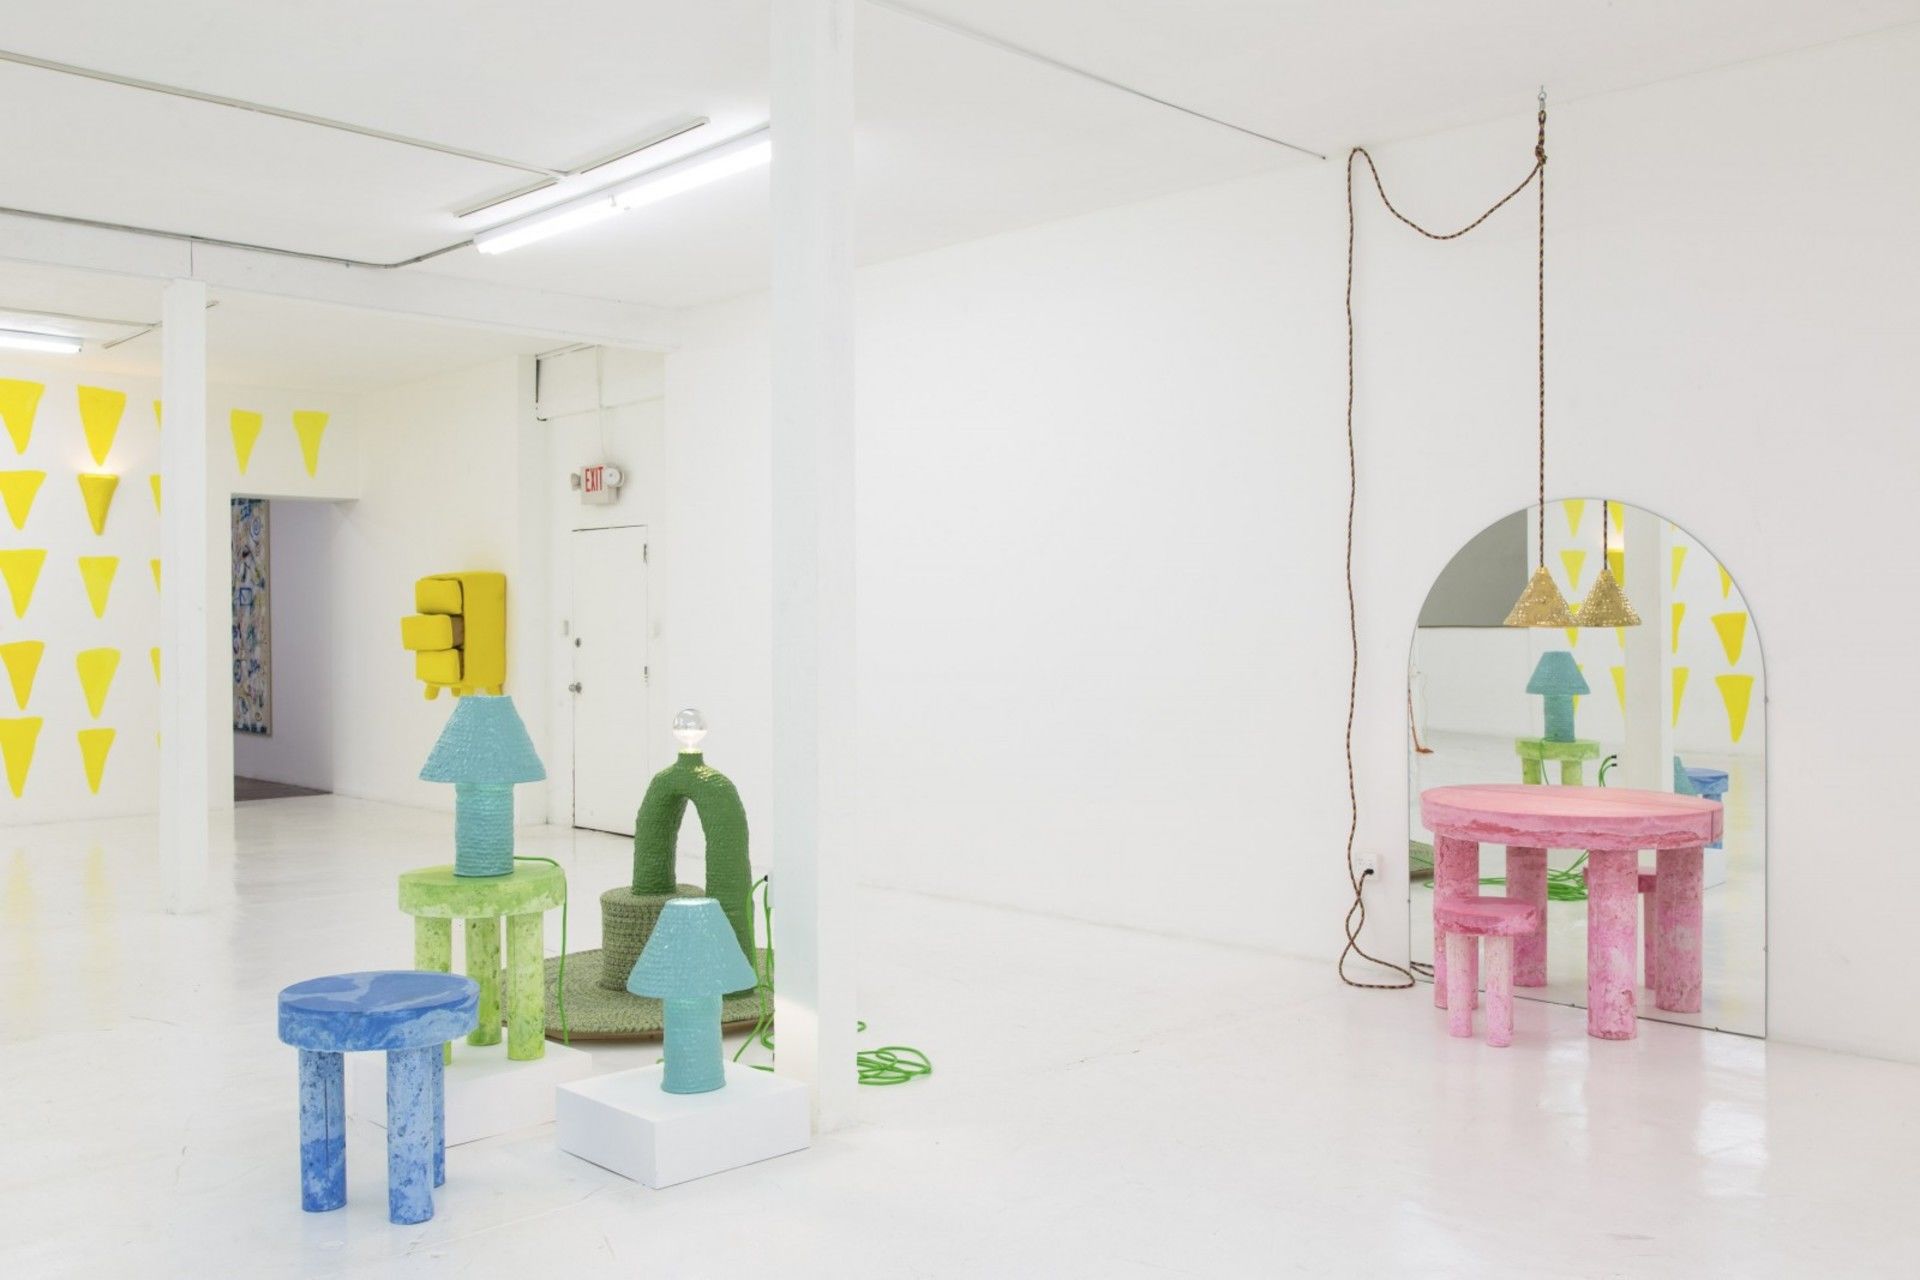 Installation view of Docile/Domicile/Dandy by Katie Stout at Gallery Diet, Miami 2015